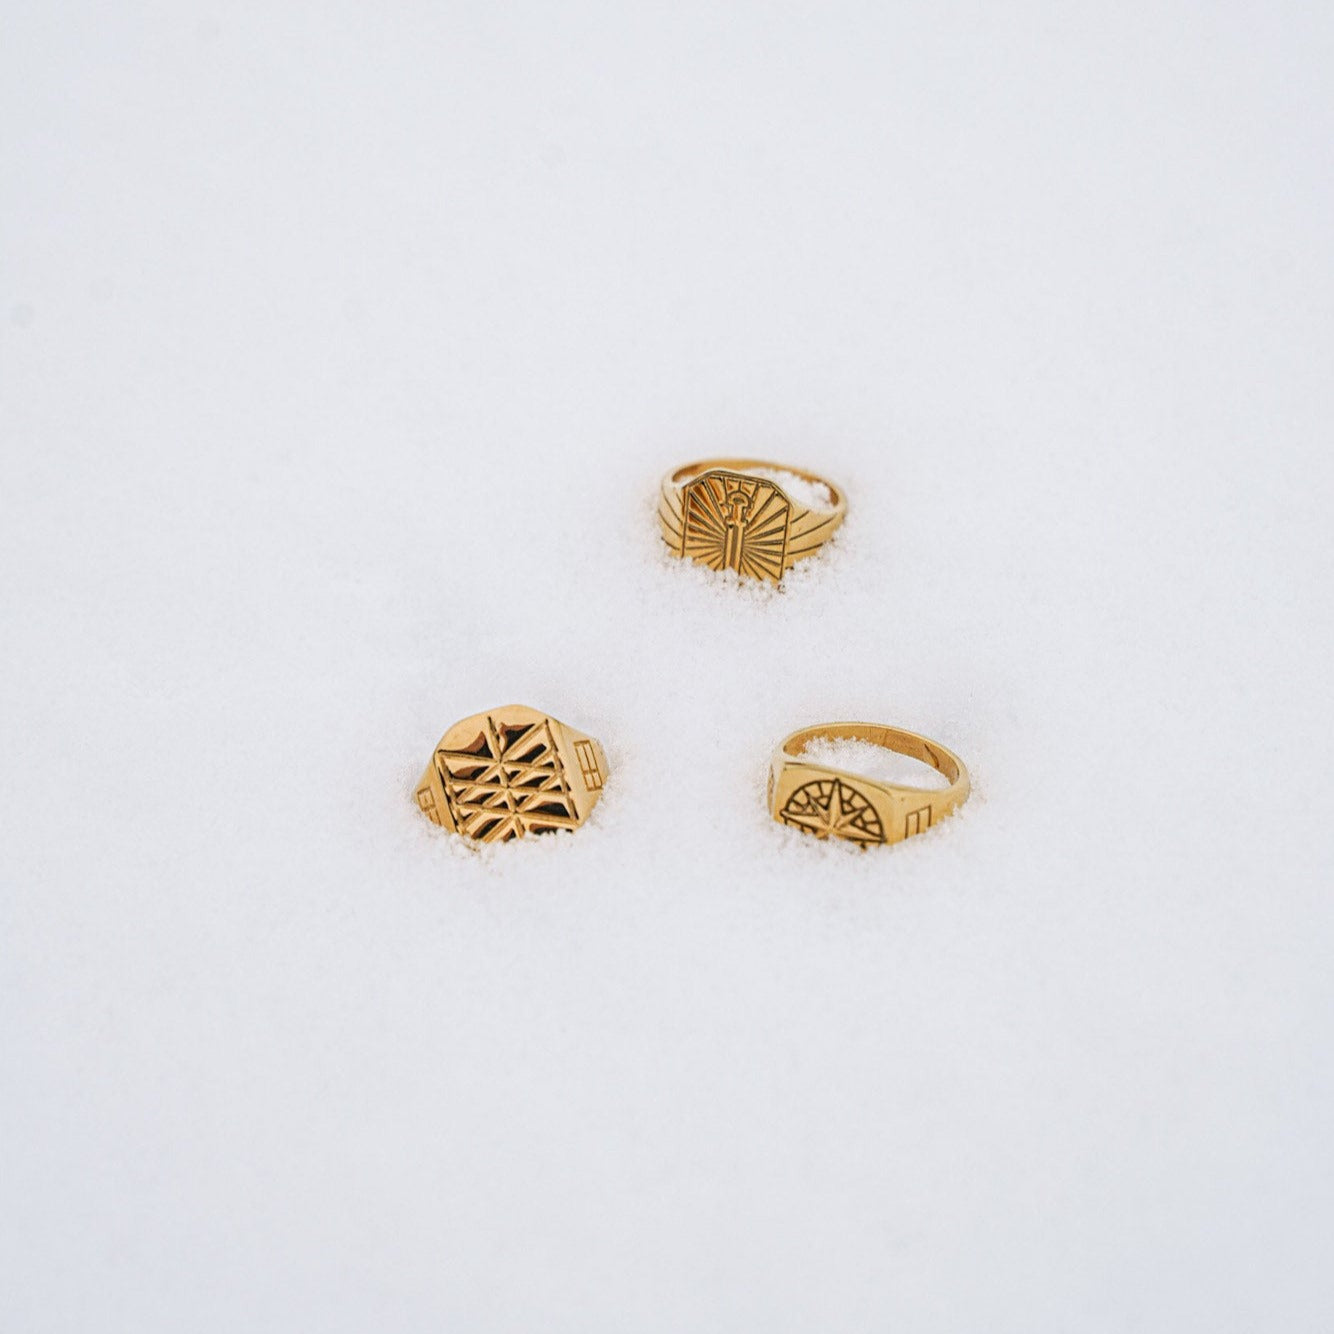 Web of Wyrd Signature ring - Gold-toned